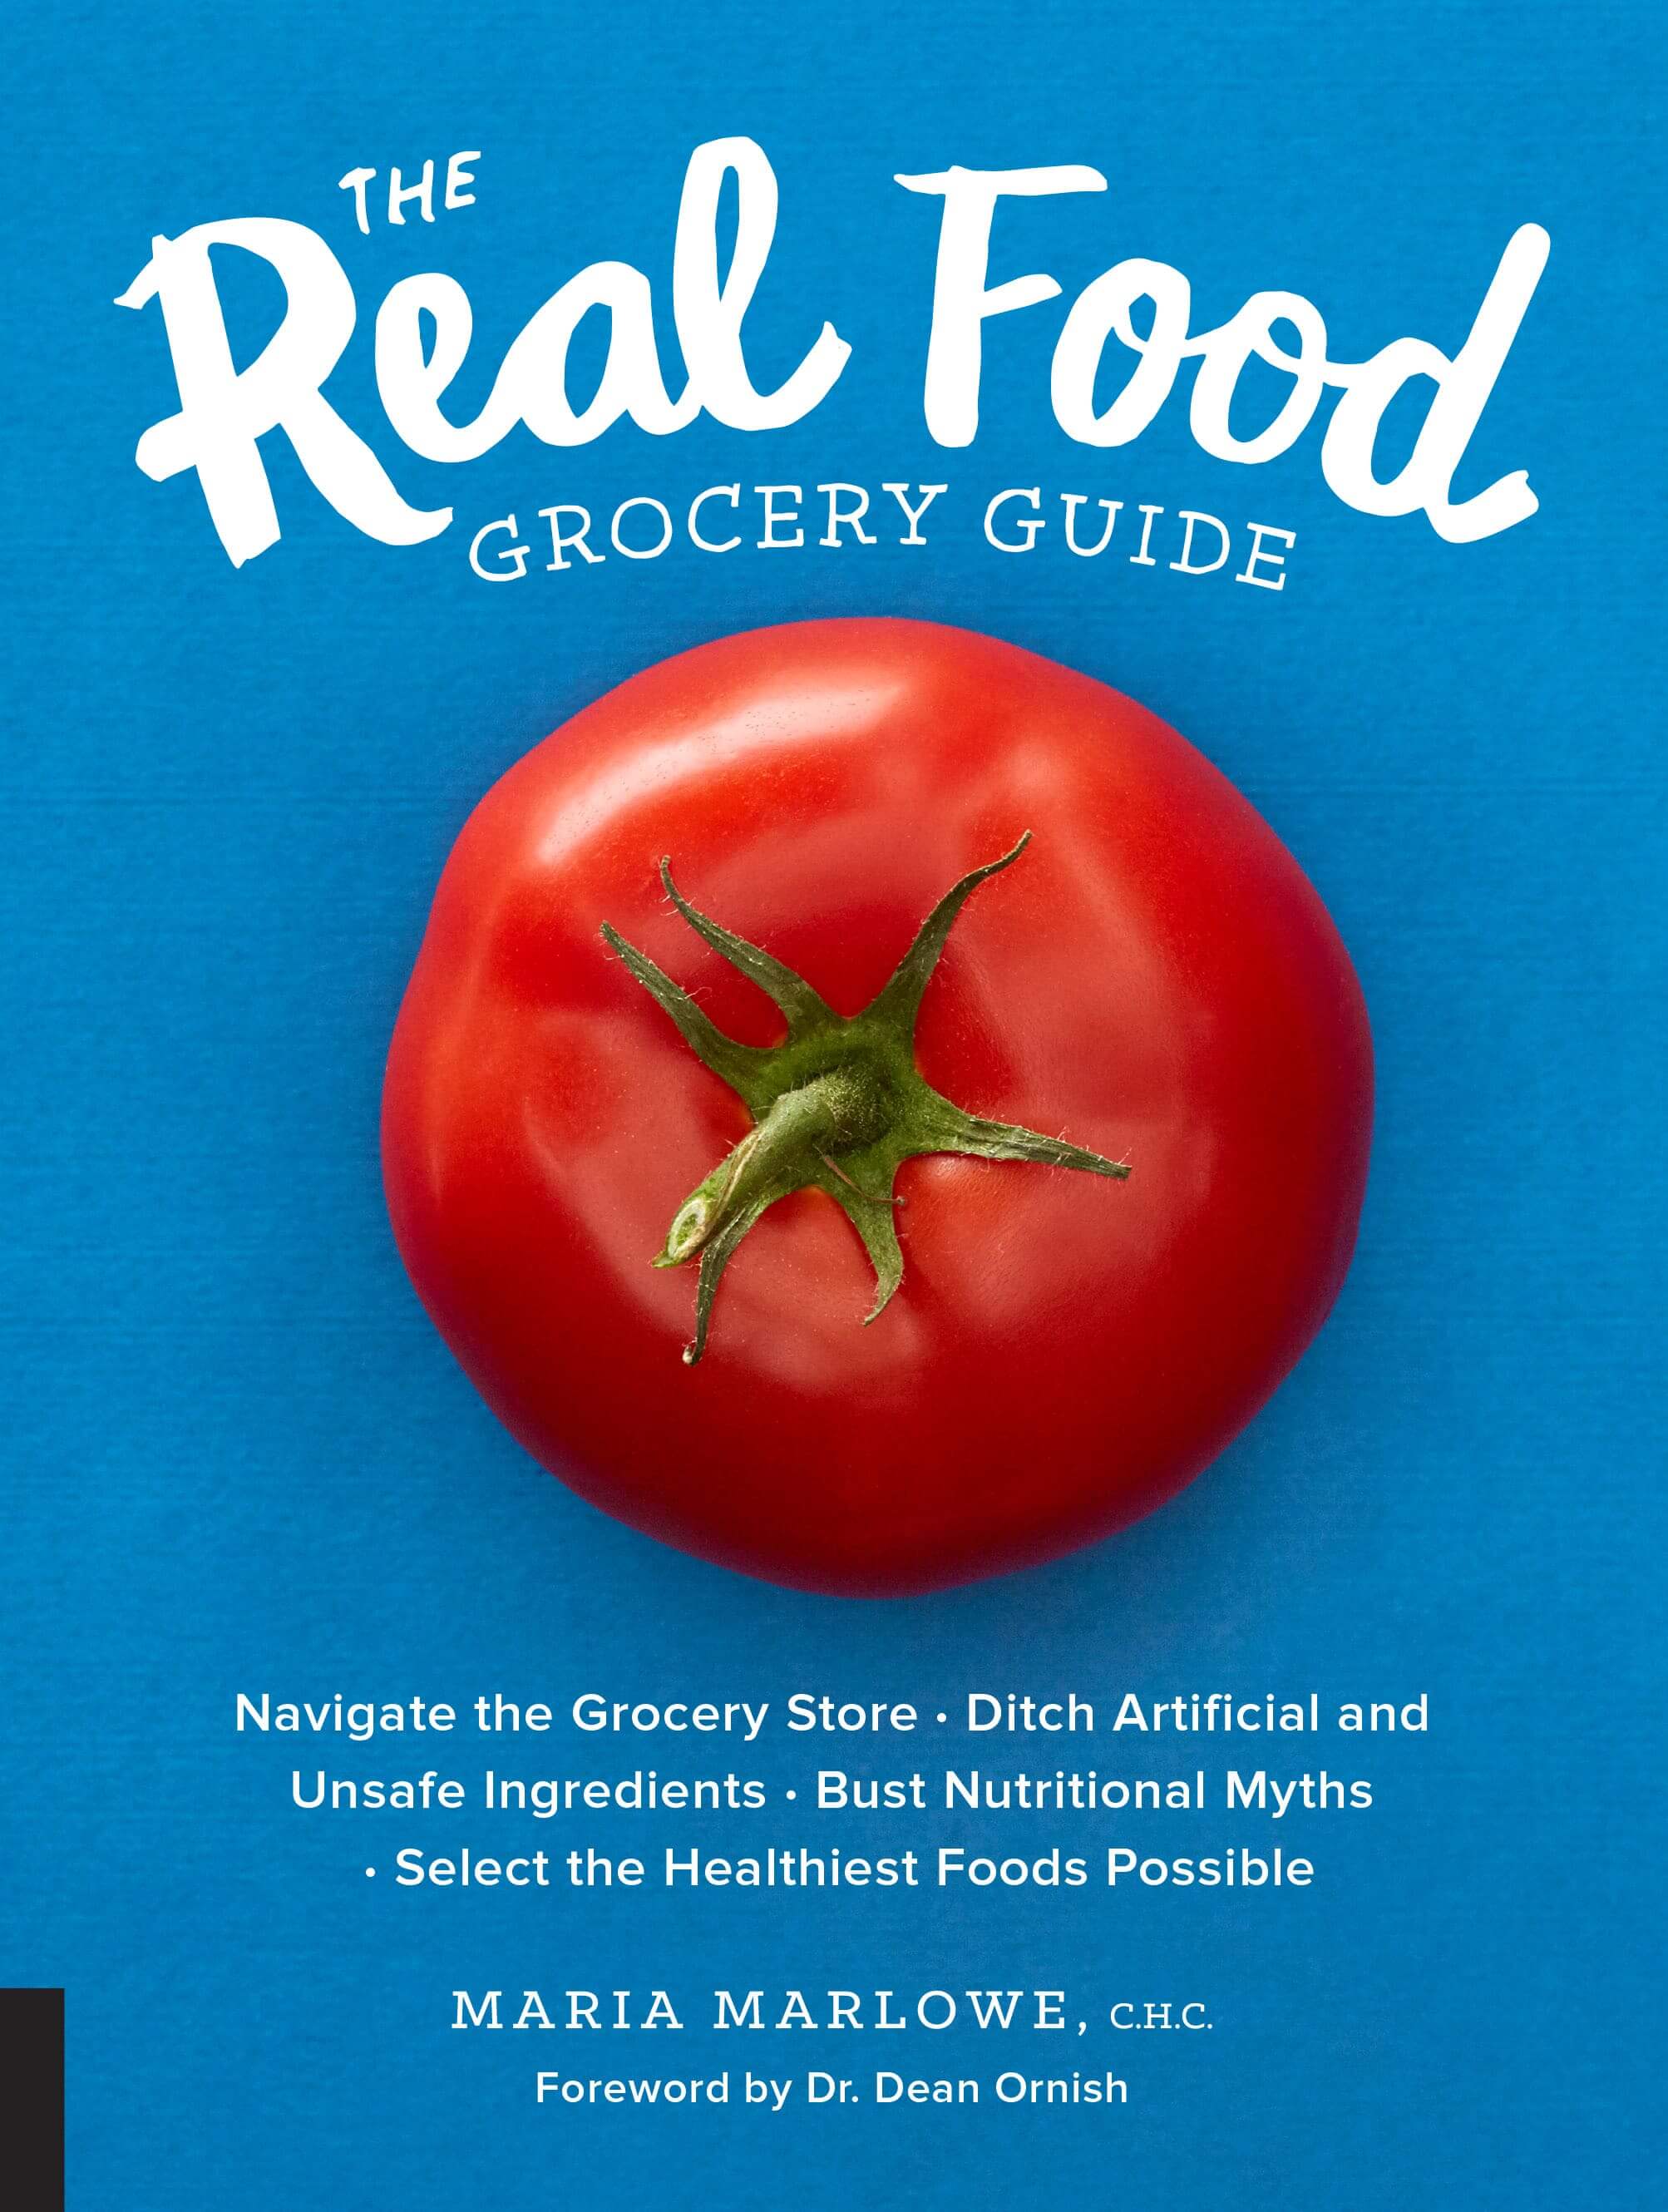 Real Food Grocery Guide_COVER.indd